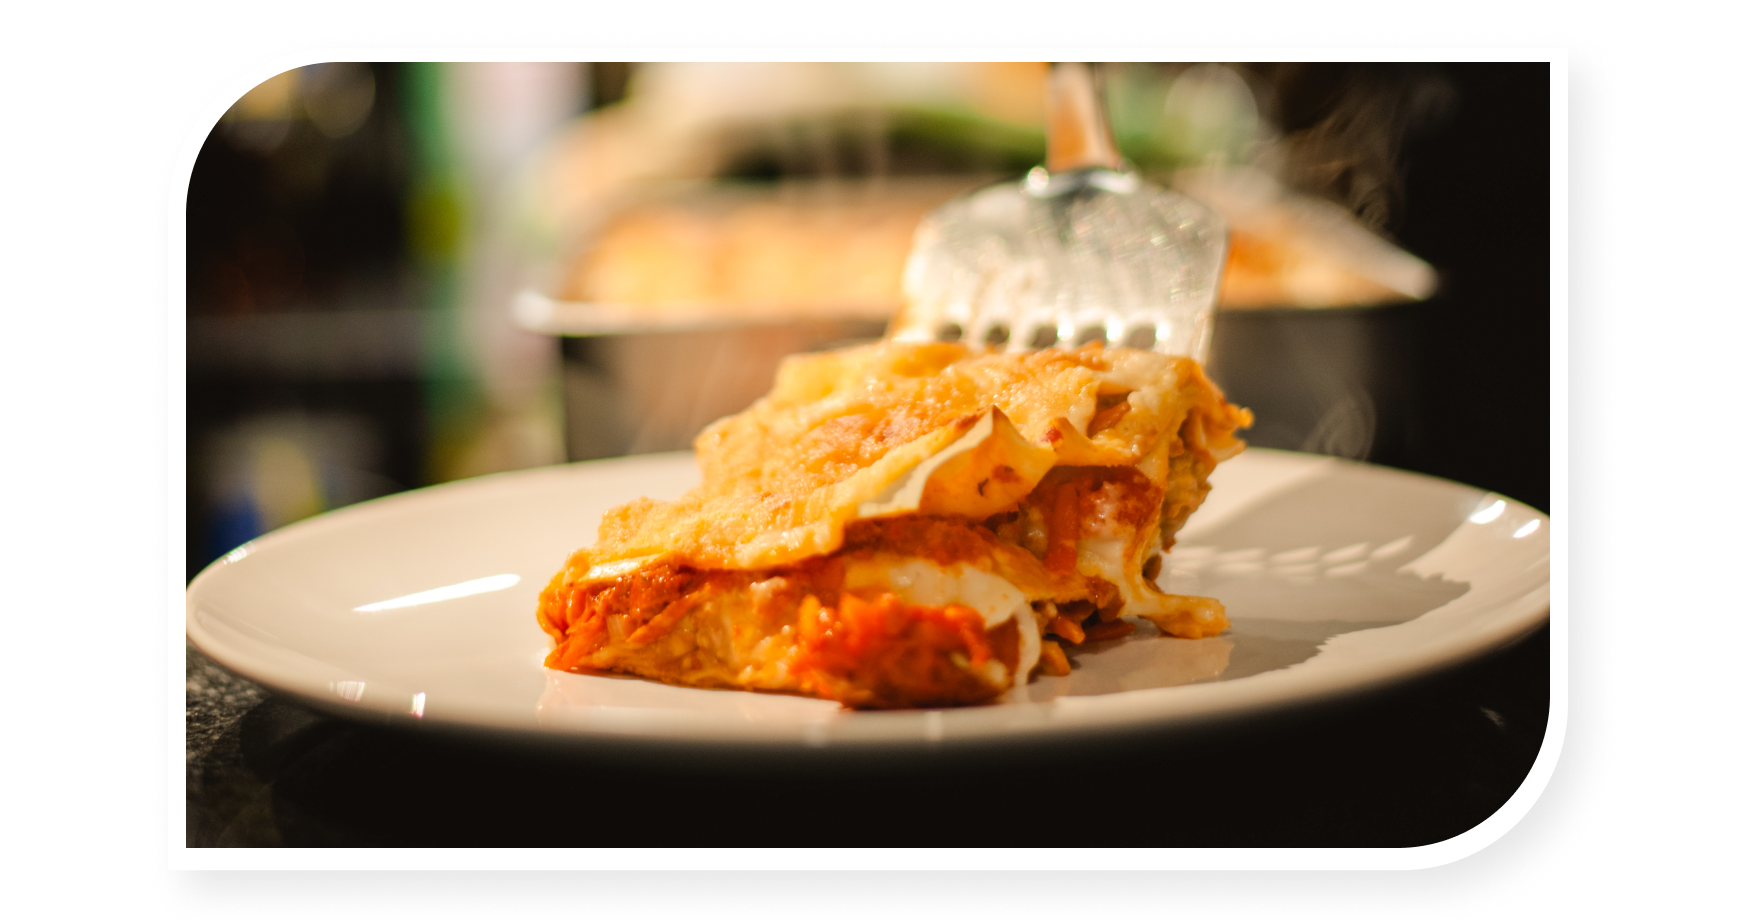 Lasagna being served on a plate